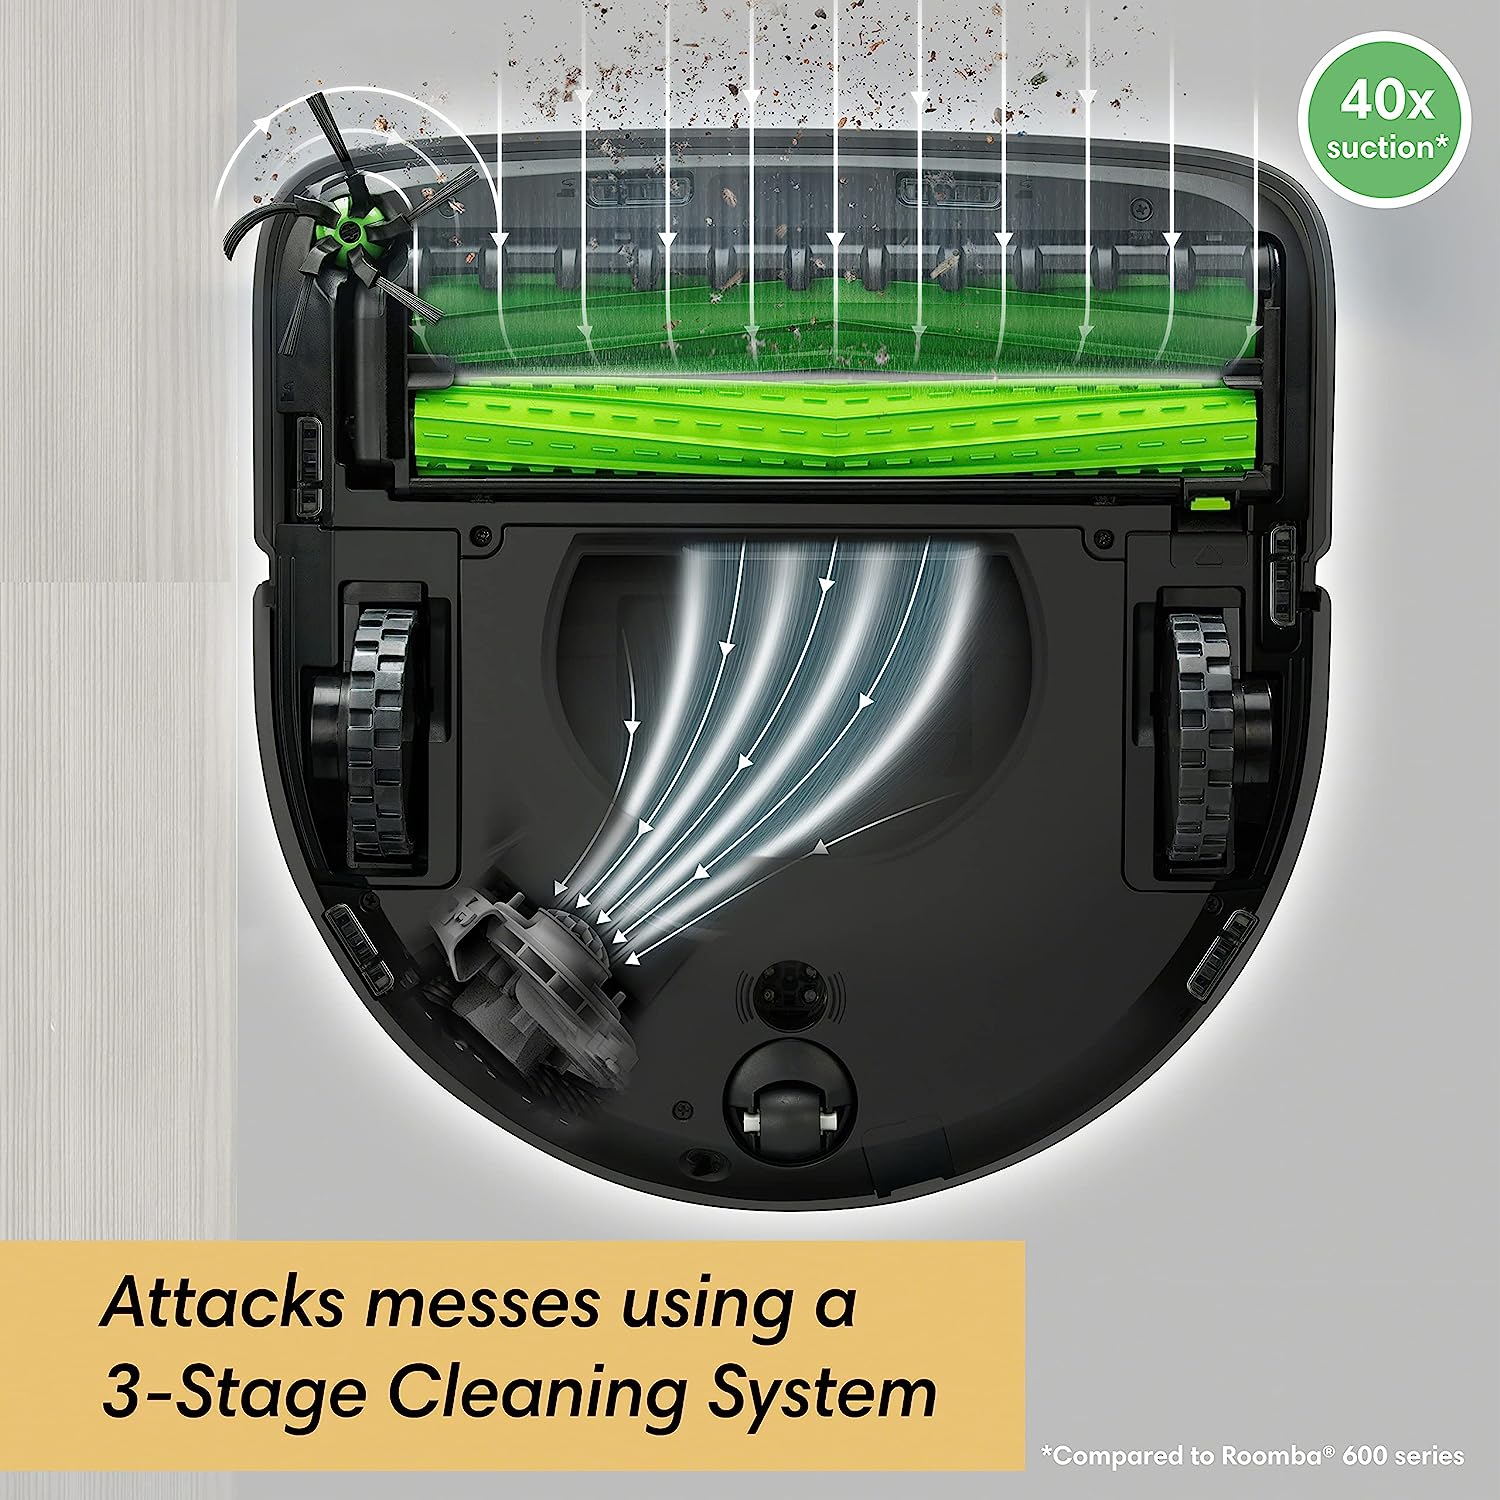 iRobot Roomba s9+ (9550) Self Emptying Robot Vacuum - Empties Itself for up to 60 Days, Detects  Cleans Around Objects in Your Home, Smart Mapping, Powerful Suction, Corner  Edge Cleaning